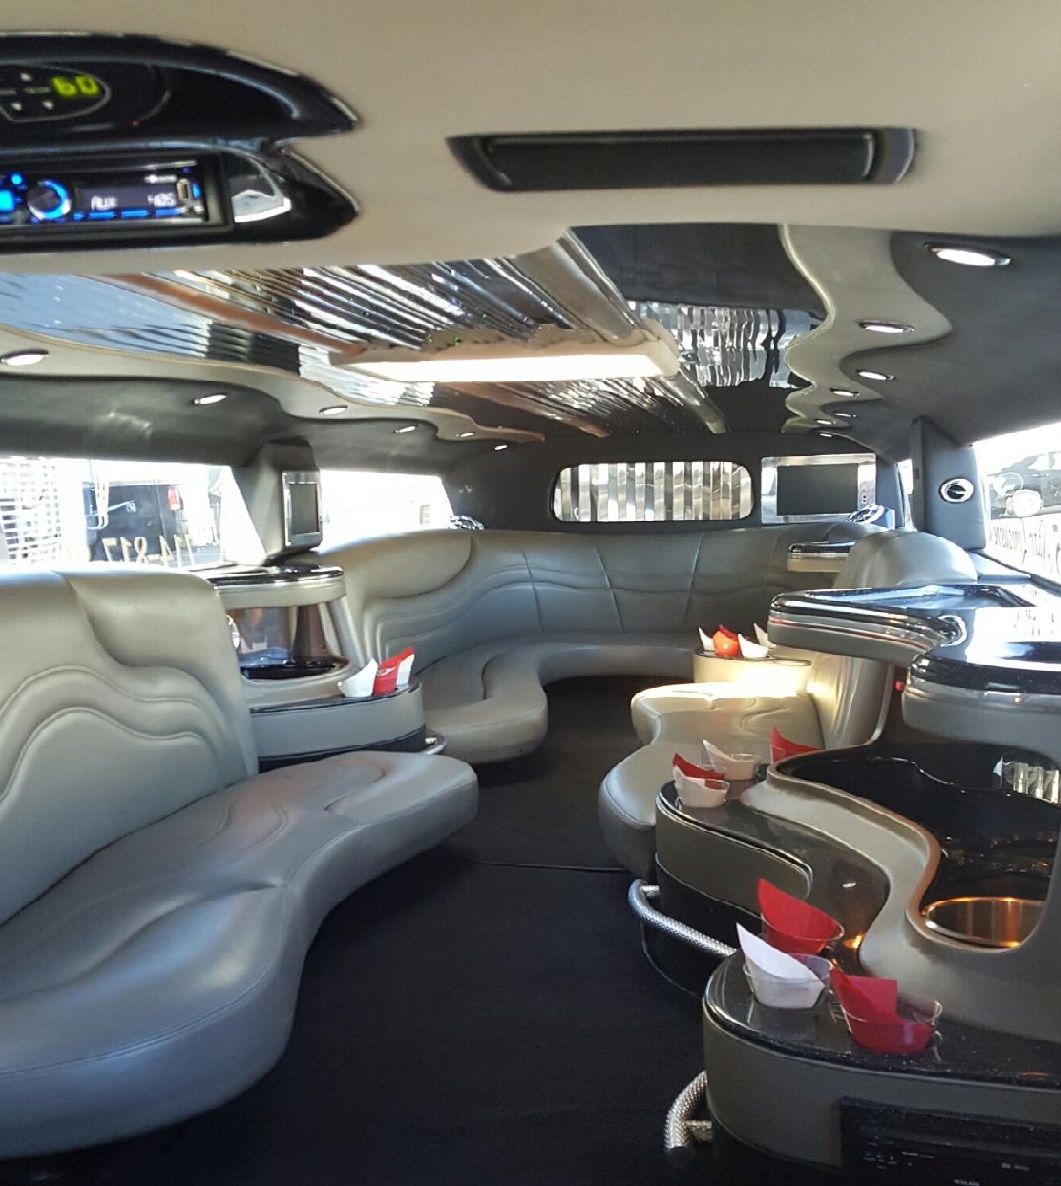 Upgrade Your Experience with LA's Finest Limo Service